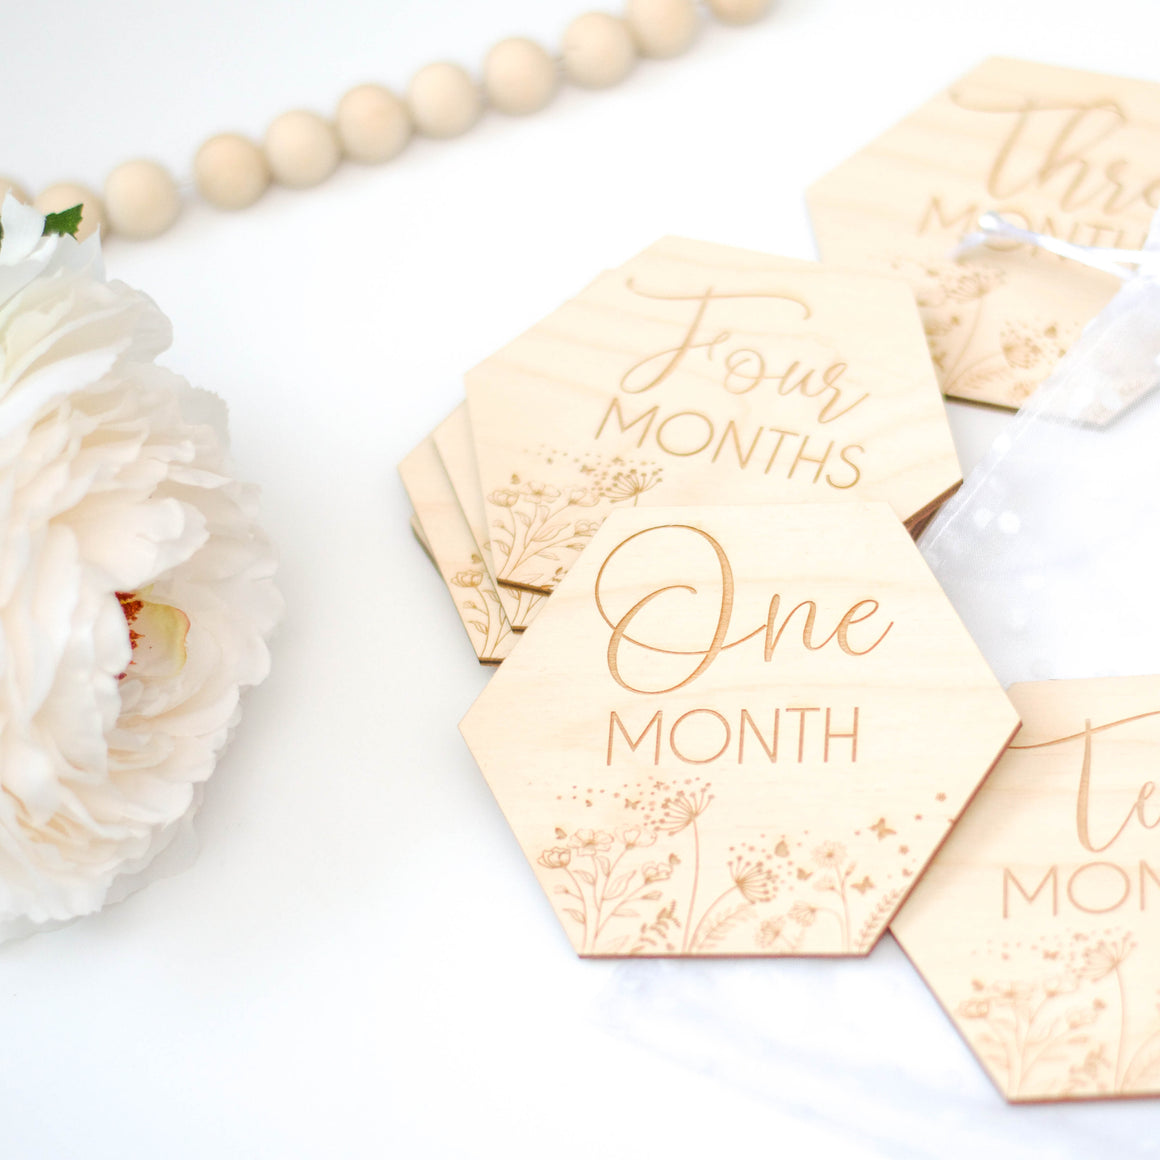 Hexagon shaped baby milestone discs that are engraved onto wood. Displayed on a white table with florals and wooden beads.